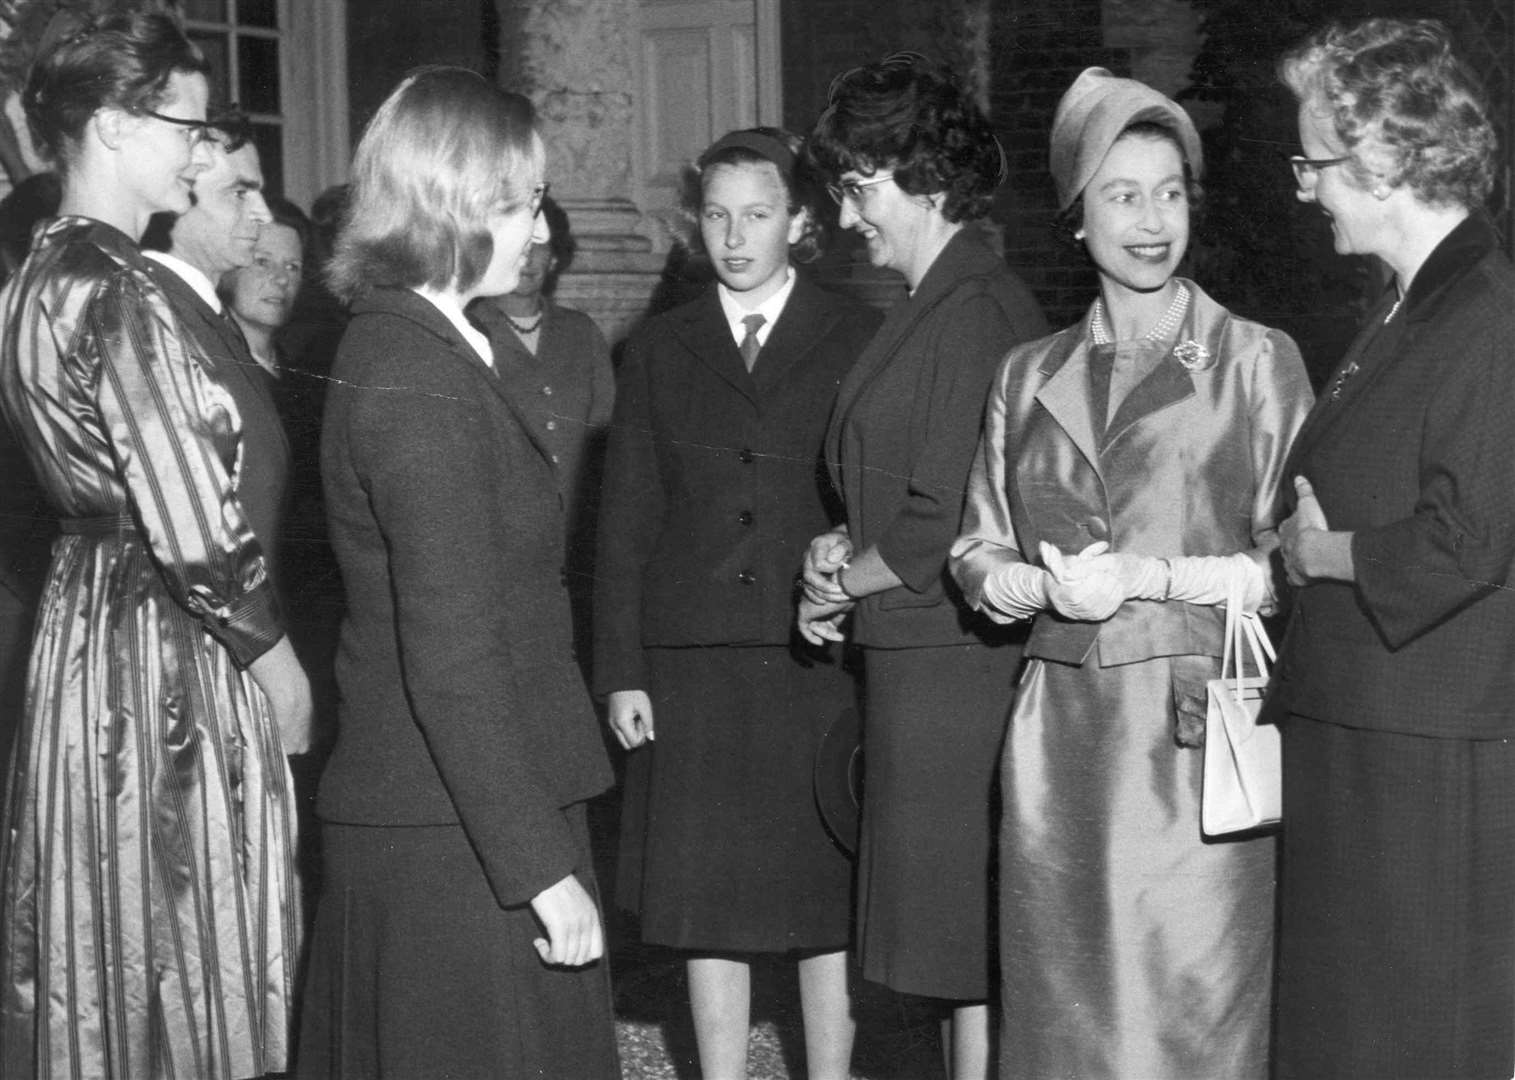 The 13-year-old Princess Anne was one of 65 new girls at Benenden School in September 1963. She arrived with The Queen and was introduced to the head mistress, Elizabeth Clarke. The Princess was ''mothered'' by Elizabeth Somershield, who was the same age but in her second term. She was in Magnolia dormitory with three other girls